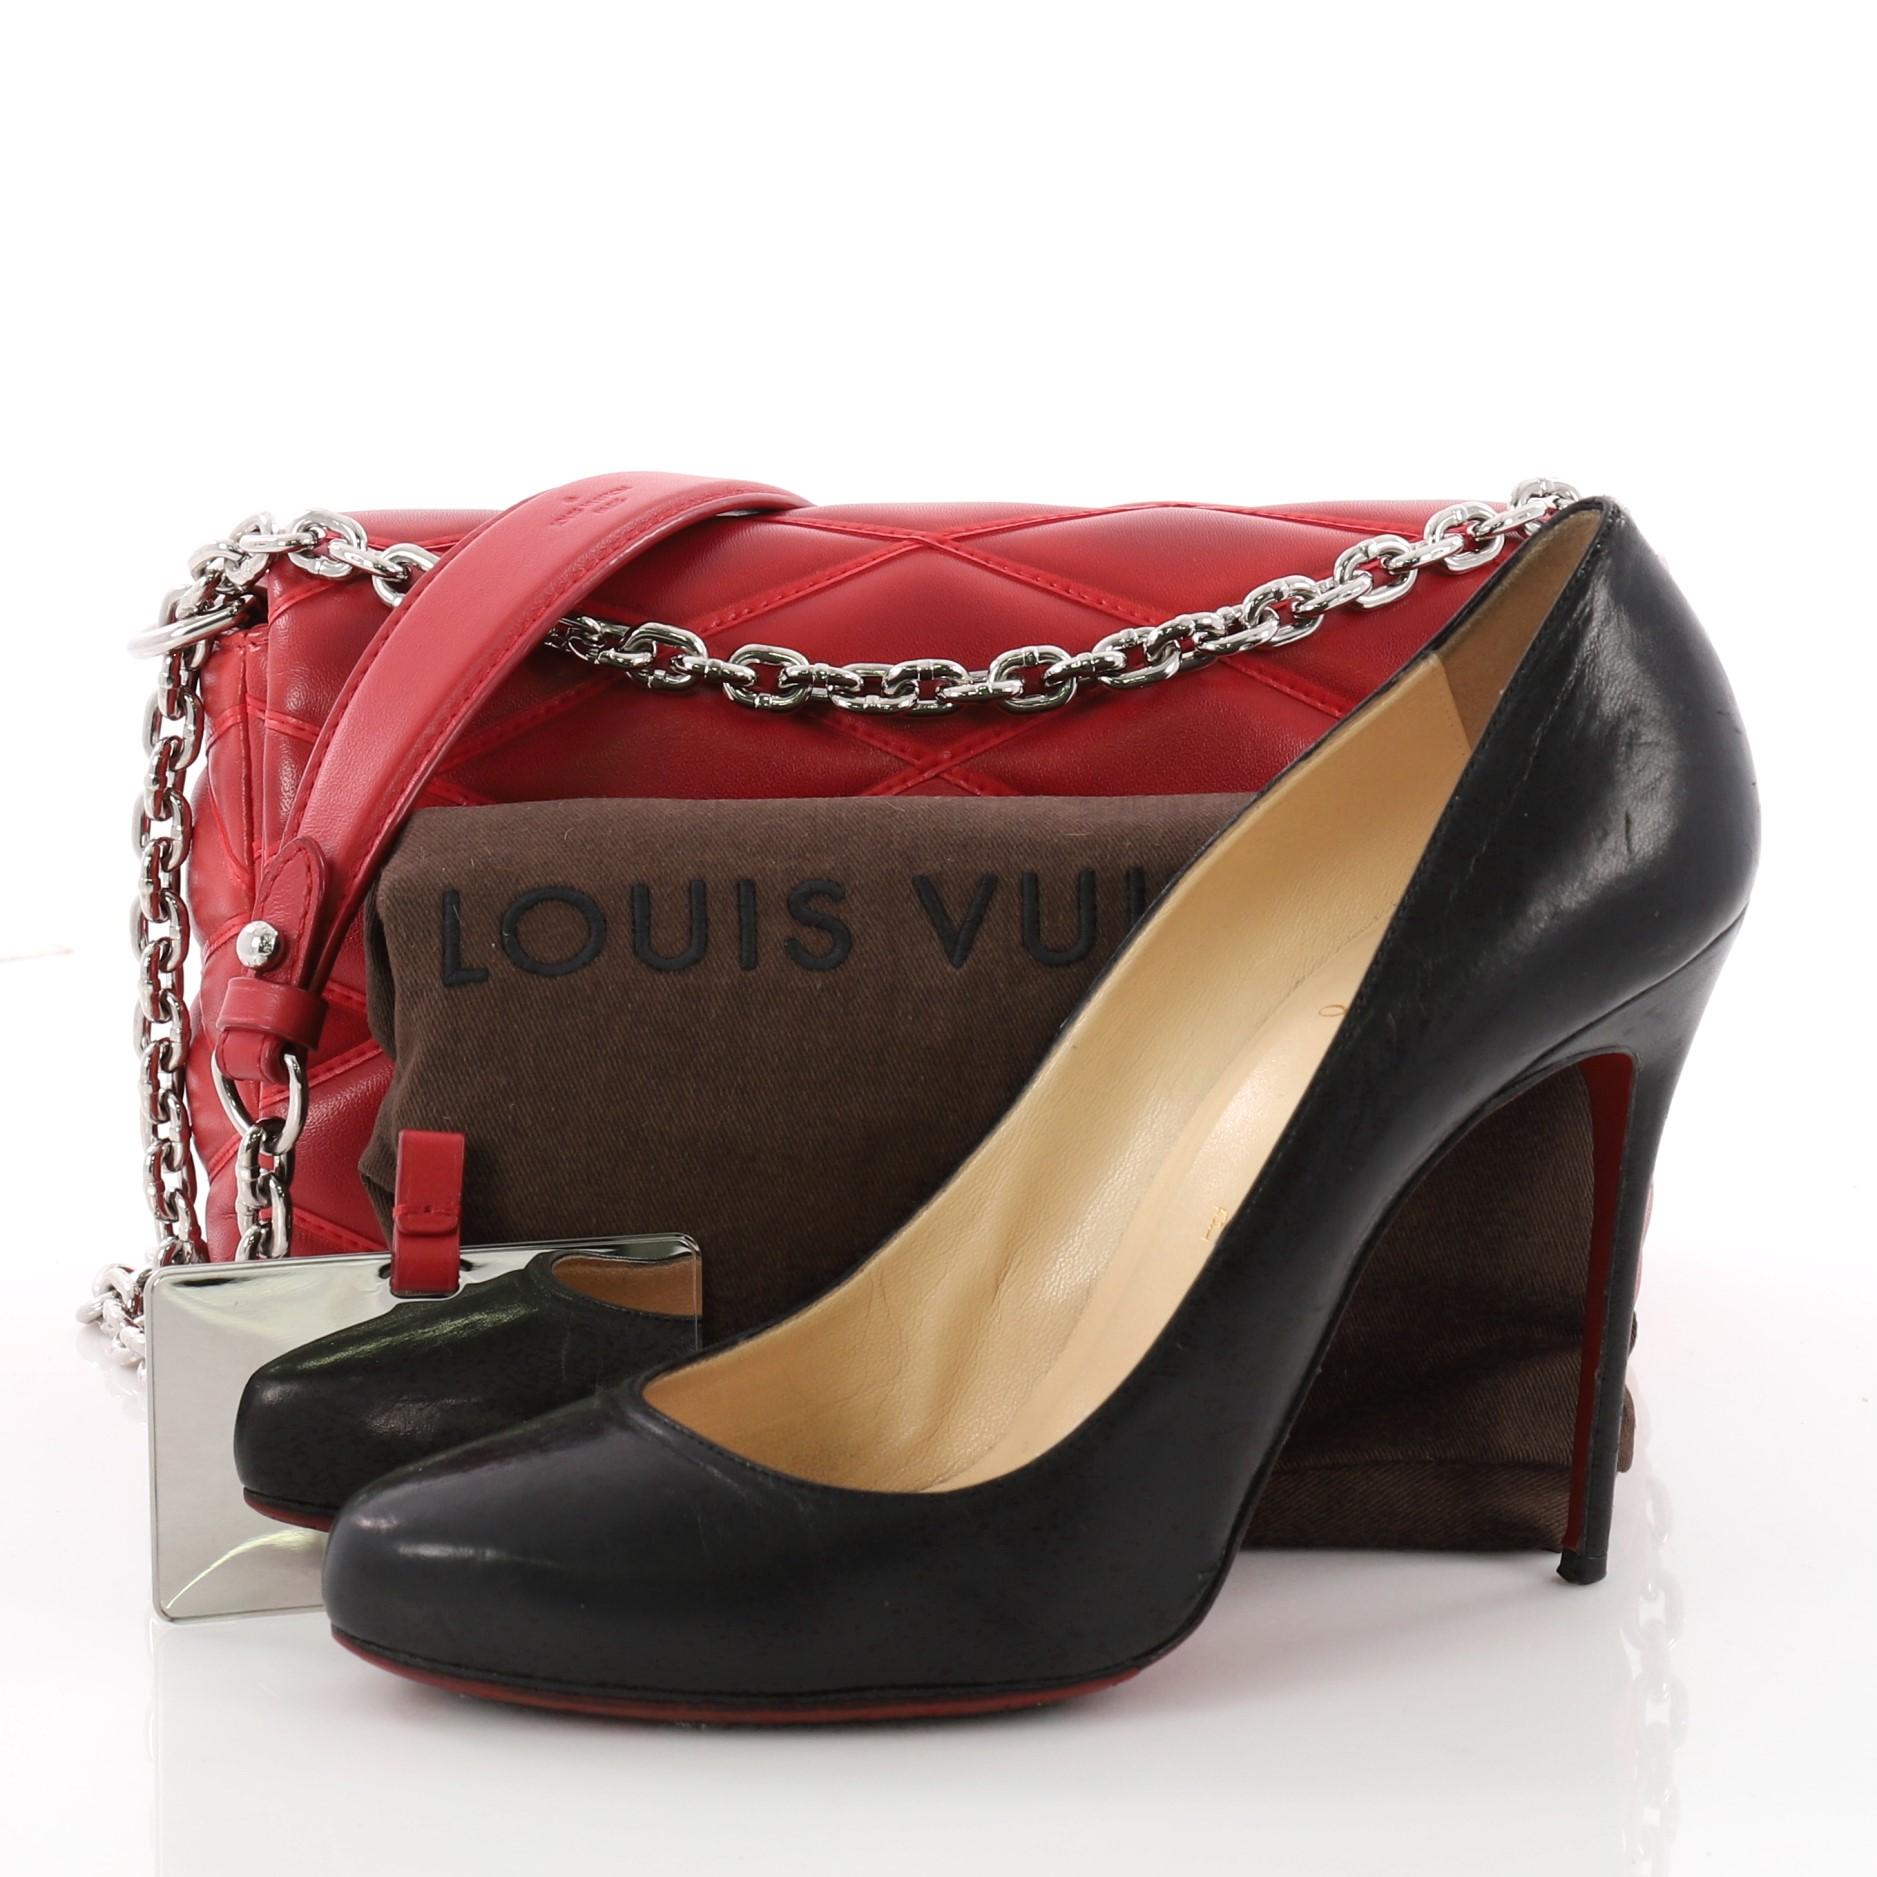 This authentic Louis Vuitton GO-14 Handbag Malletage Leather PM is a vintage-inspired modern bag. Crafted from red malletage quilted leather, this bag features a chain-link strap with leather shoulder pad, stunning LV twist-lock and silver-tone